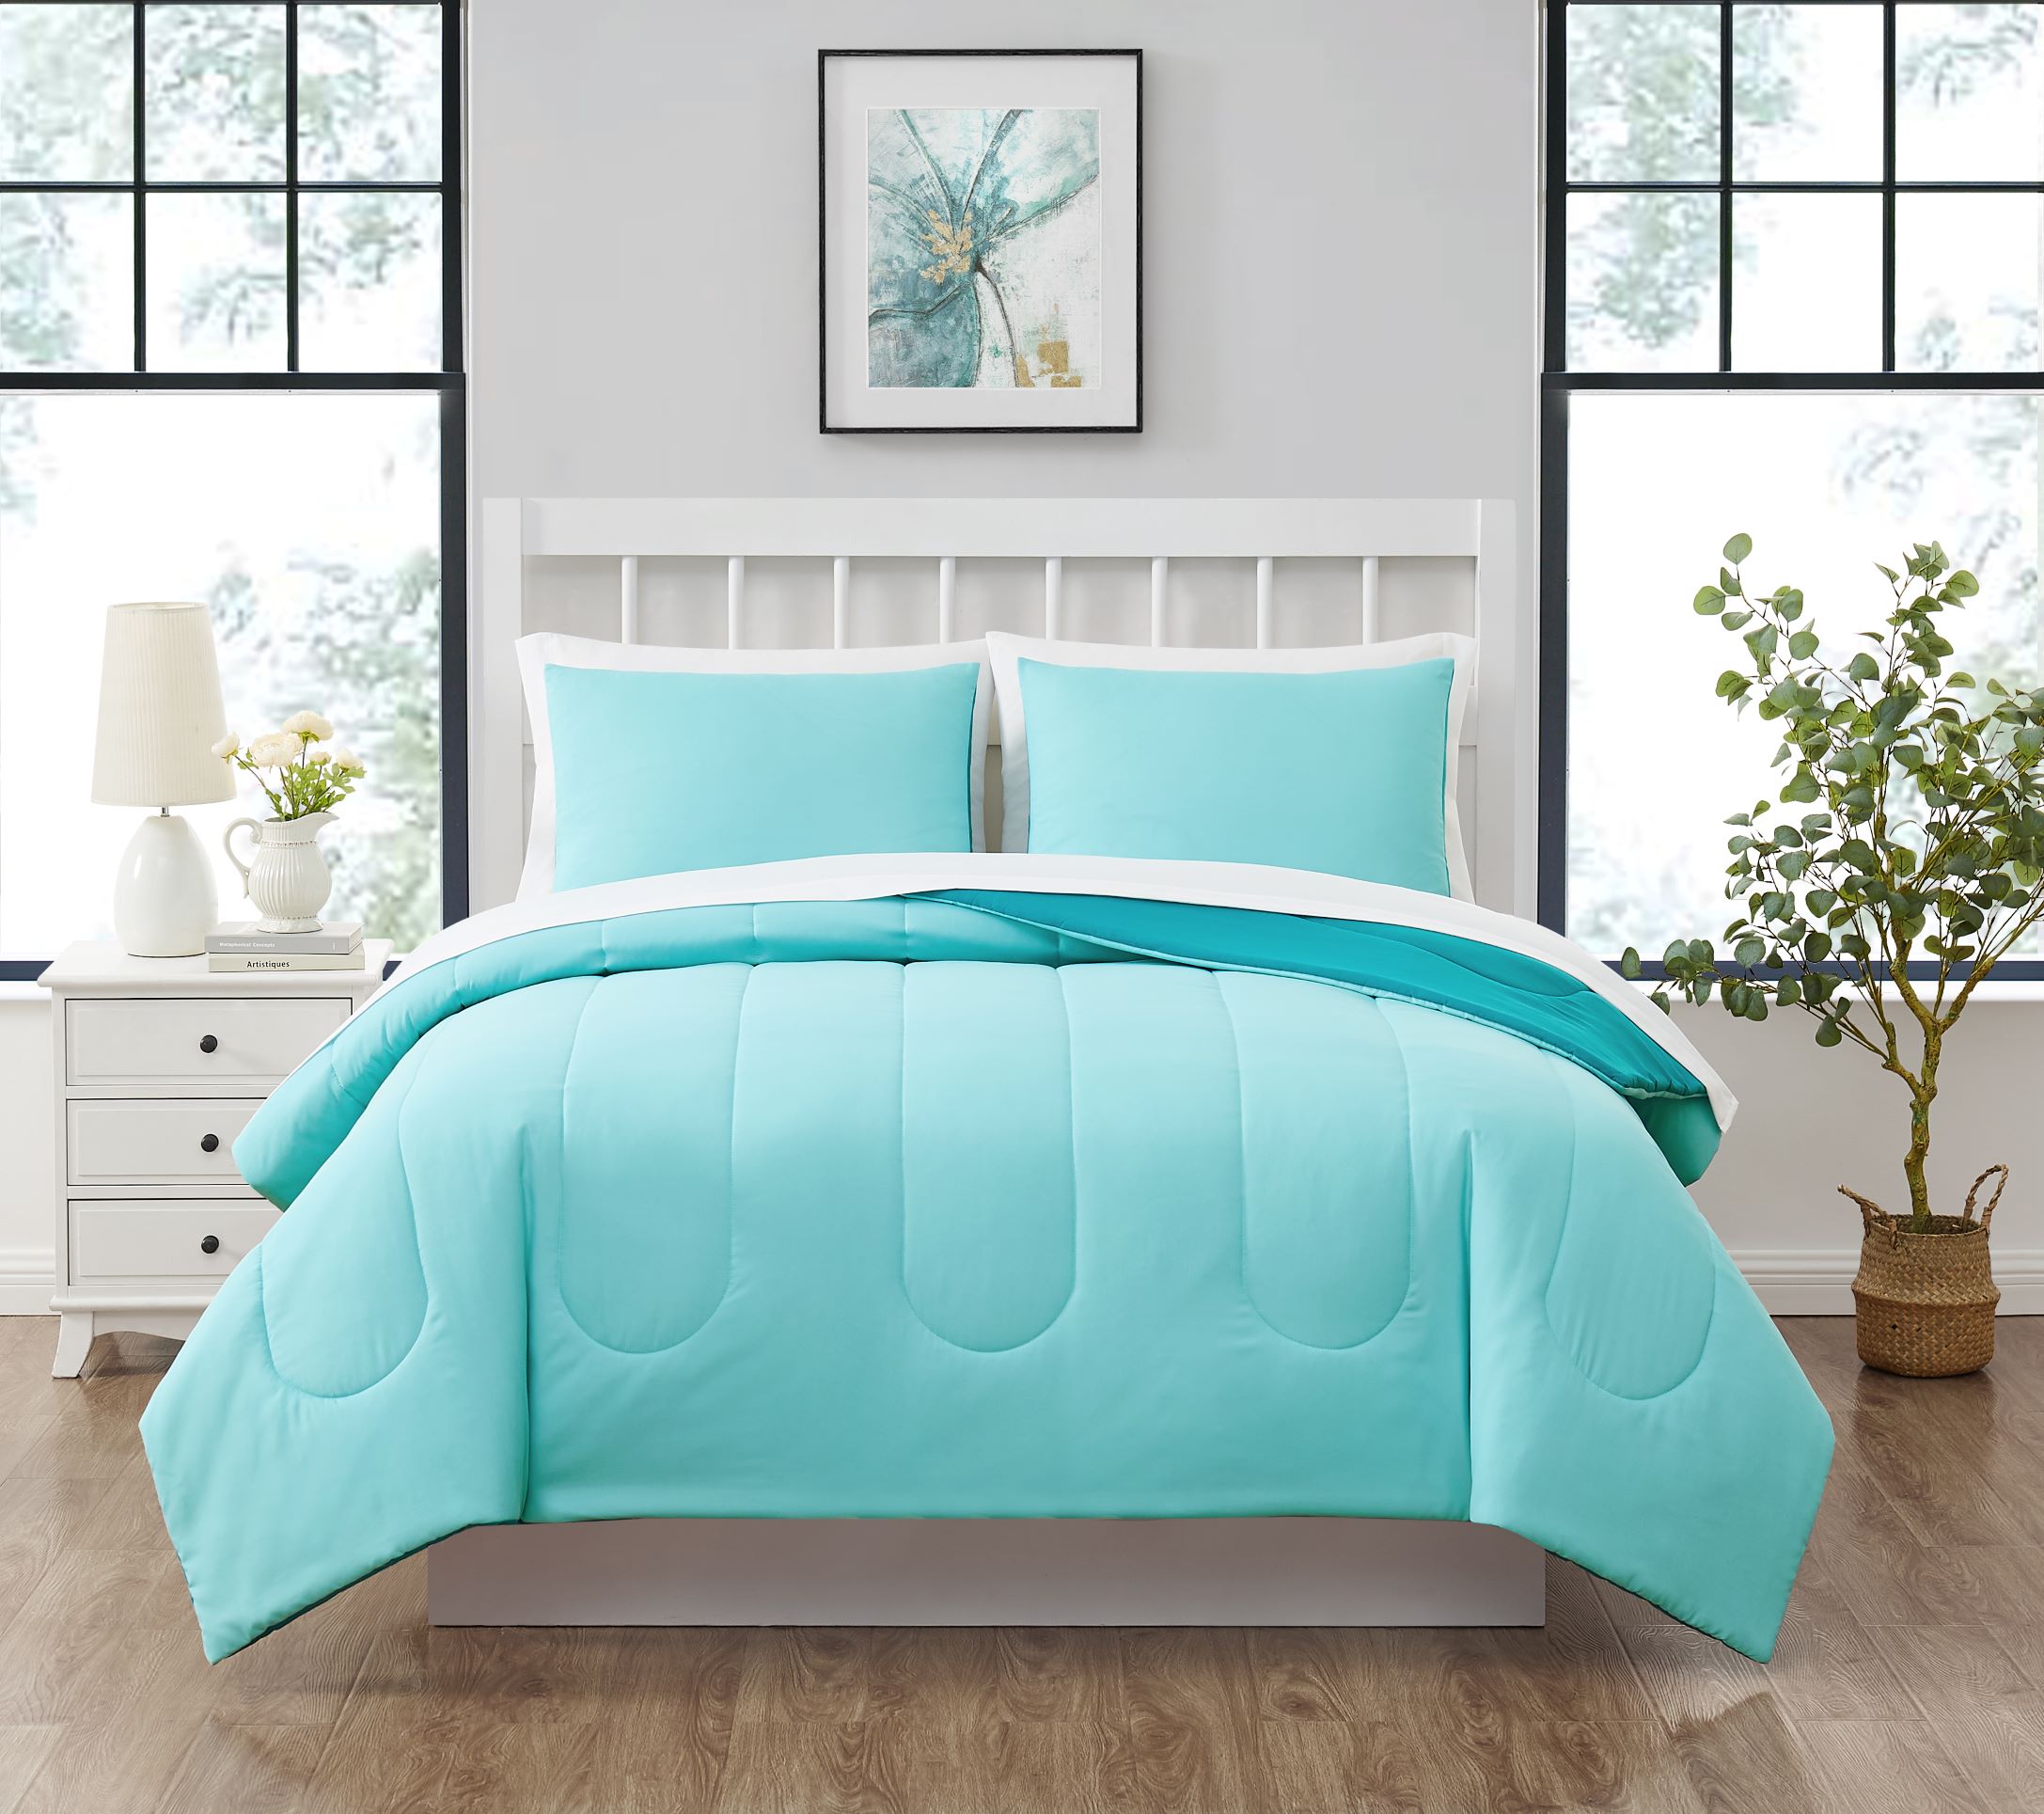 Mainstays Teal Reversible 7-Piece Bed in a Bag Comforter Set with Sheets, Queen - image 1 of 8